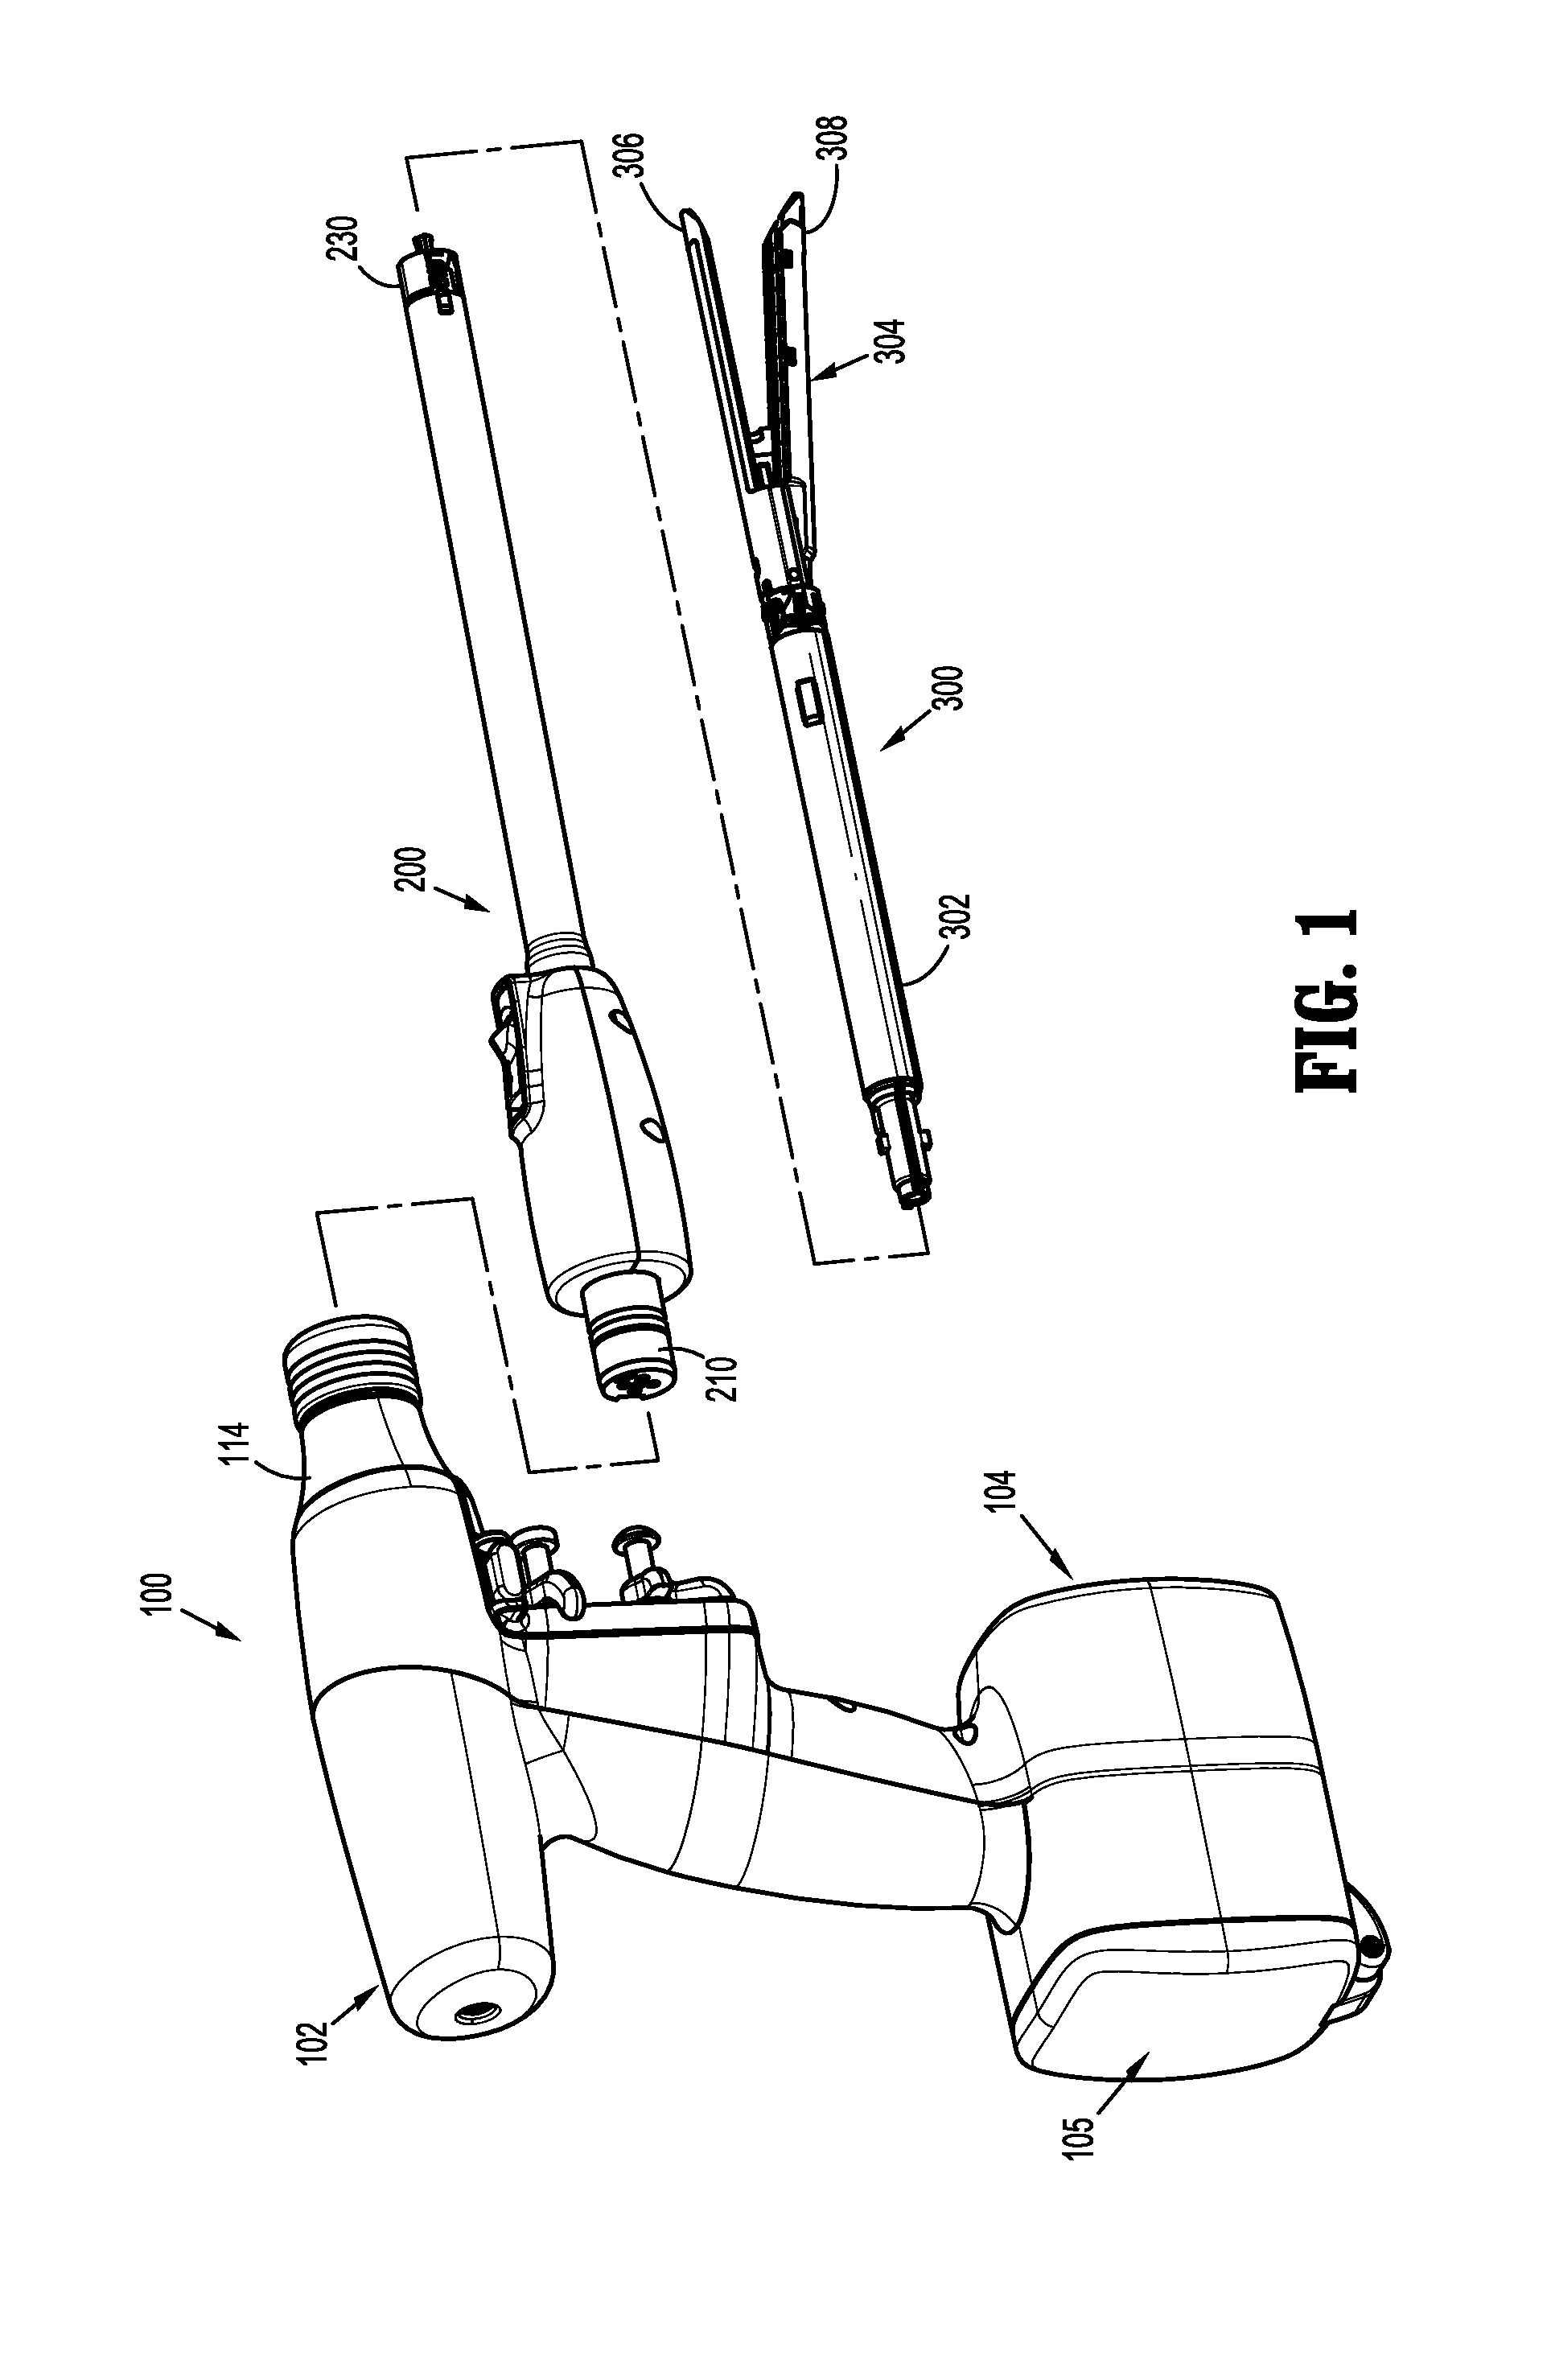 Hand held electromechanical surgical system including battery compartment diagnostic display